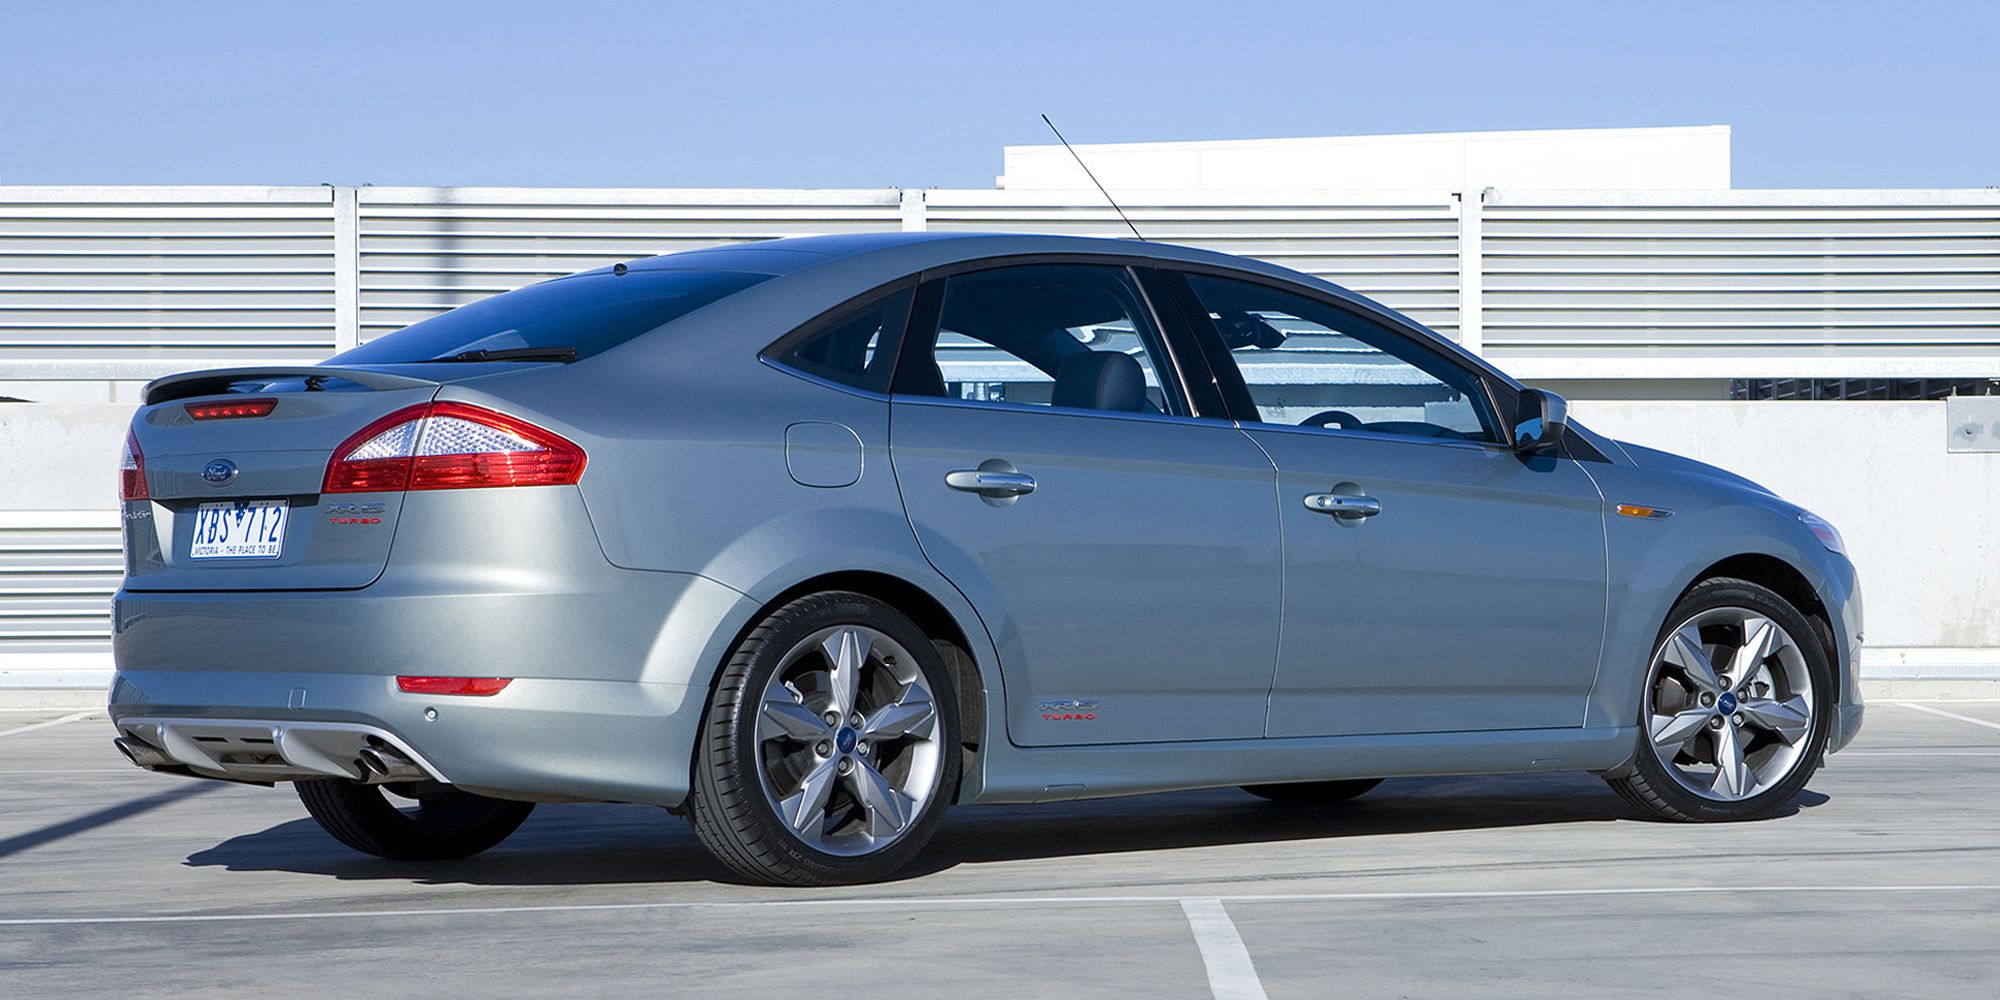 The rear of the Mondeo XR5 Turbo